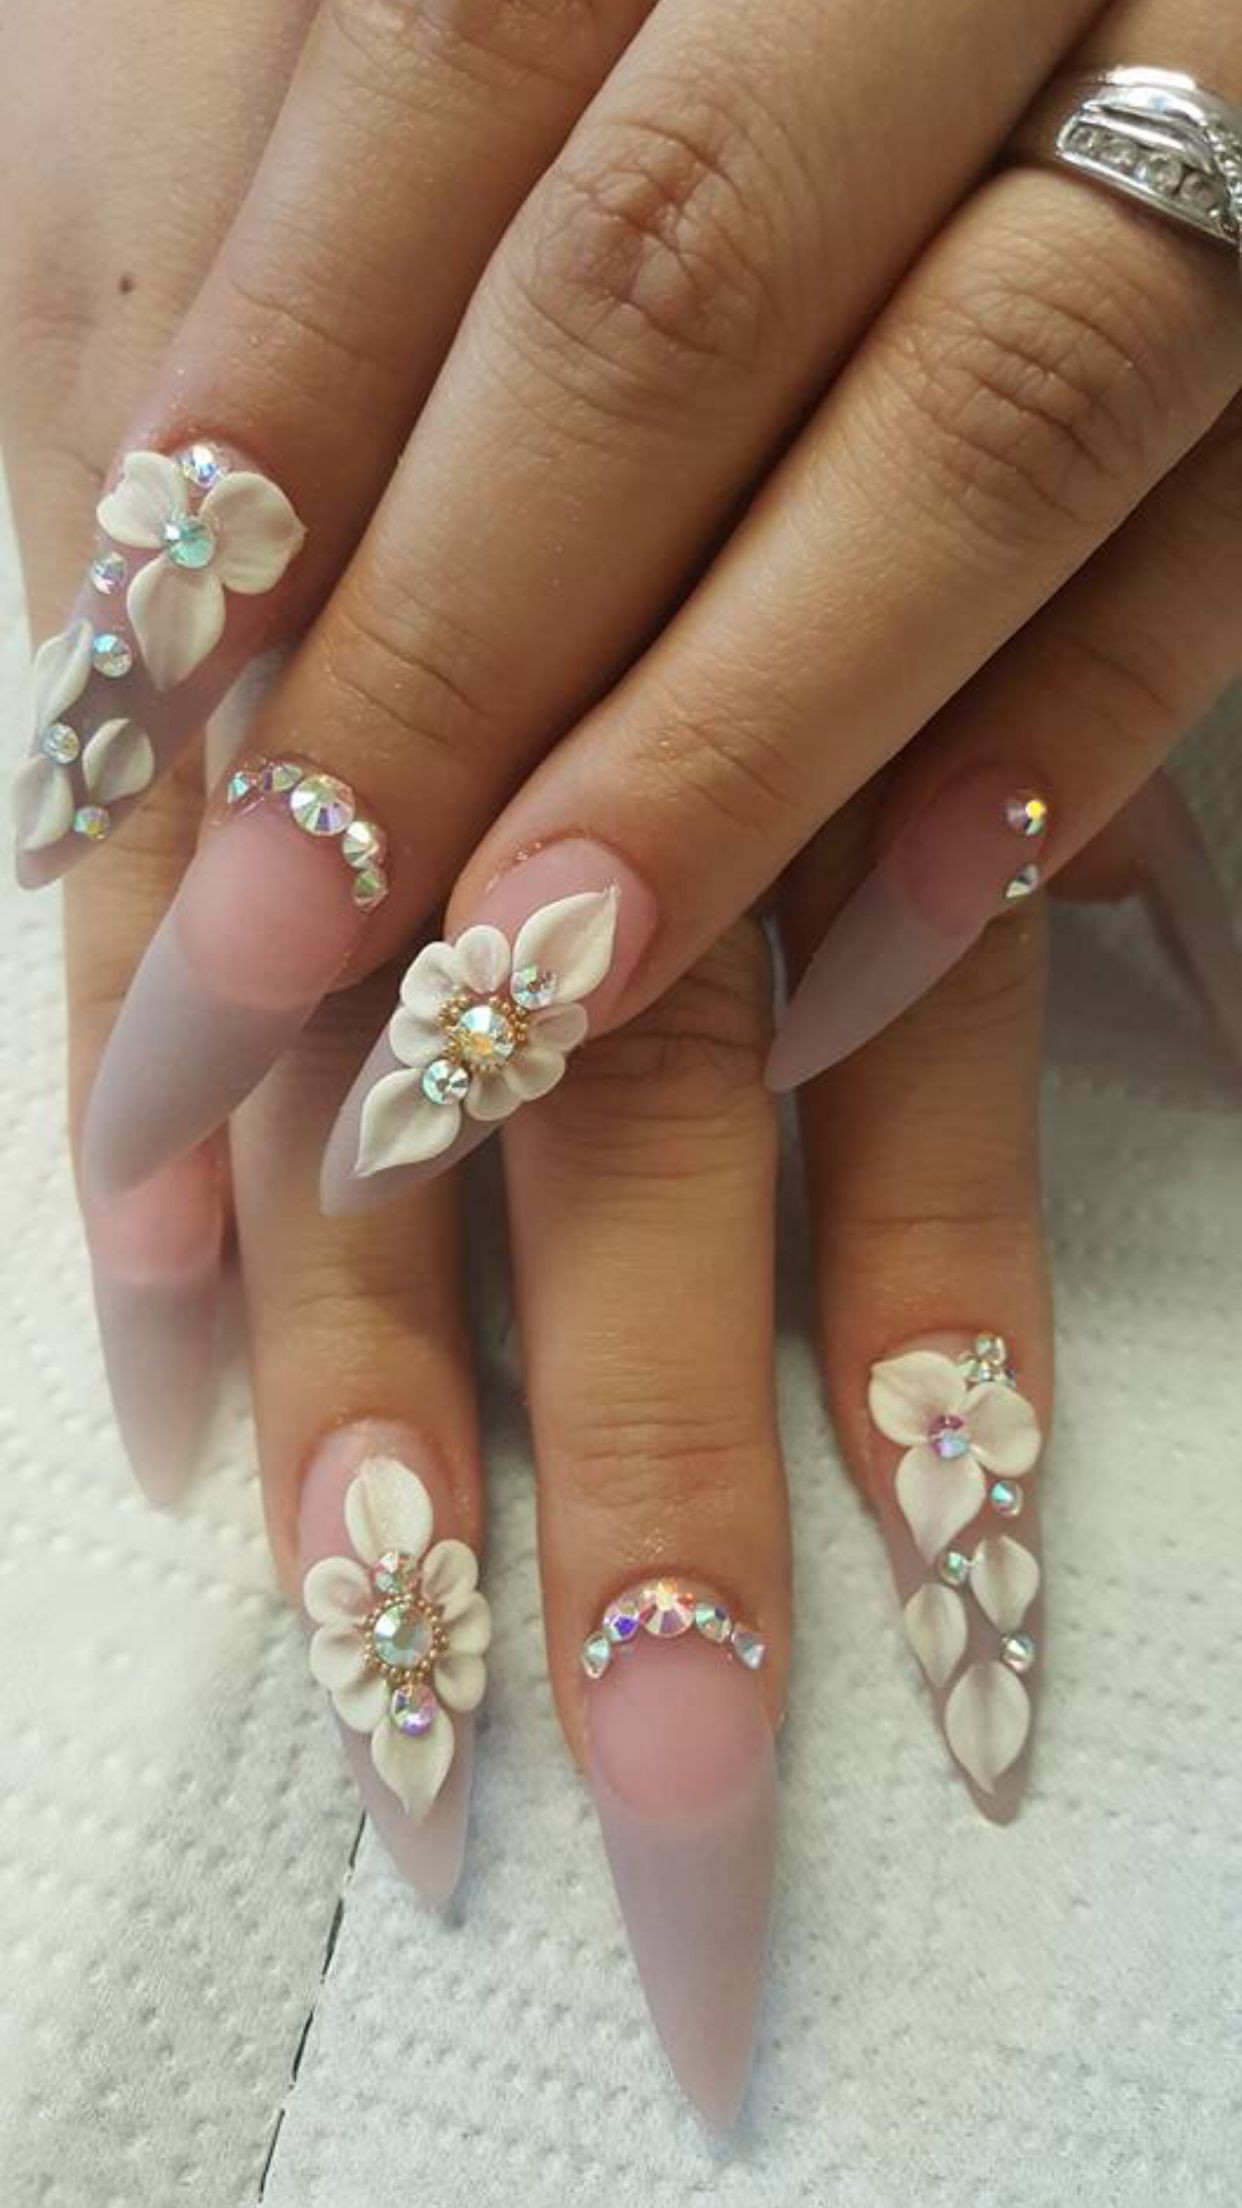 3d Wedding Nails
 Theodora nails in 2019